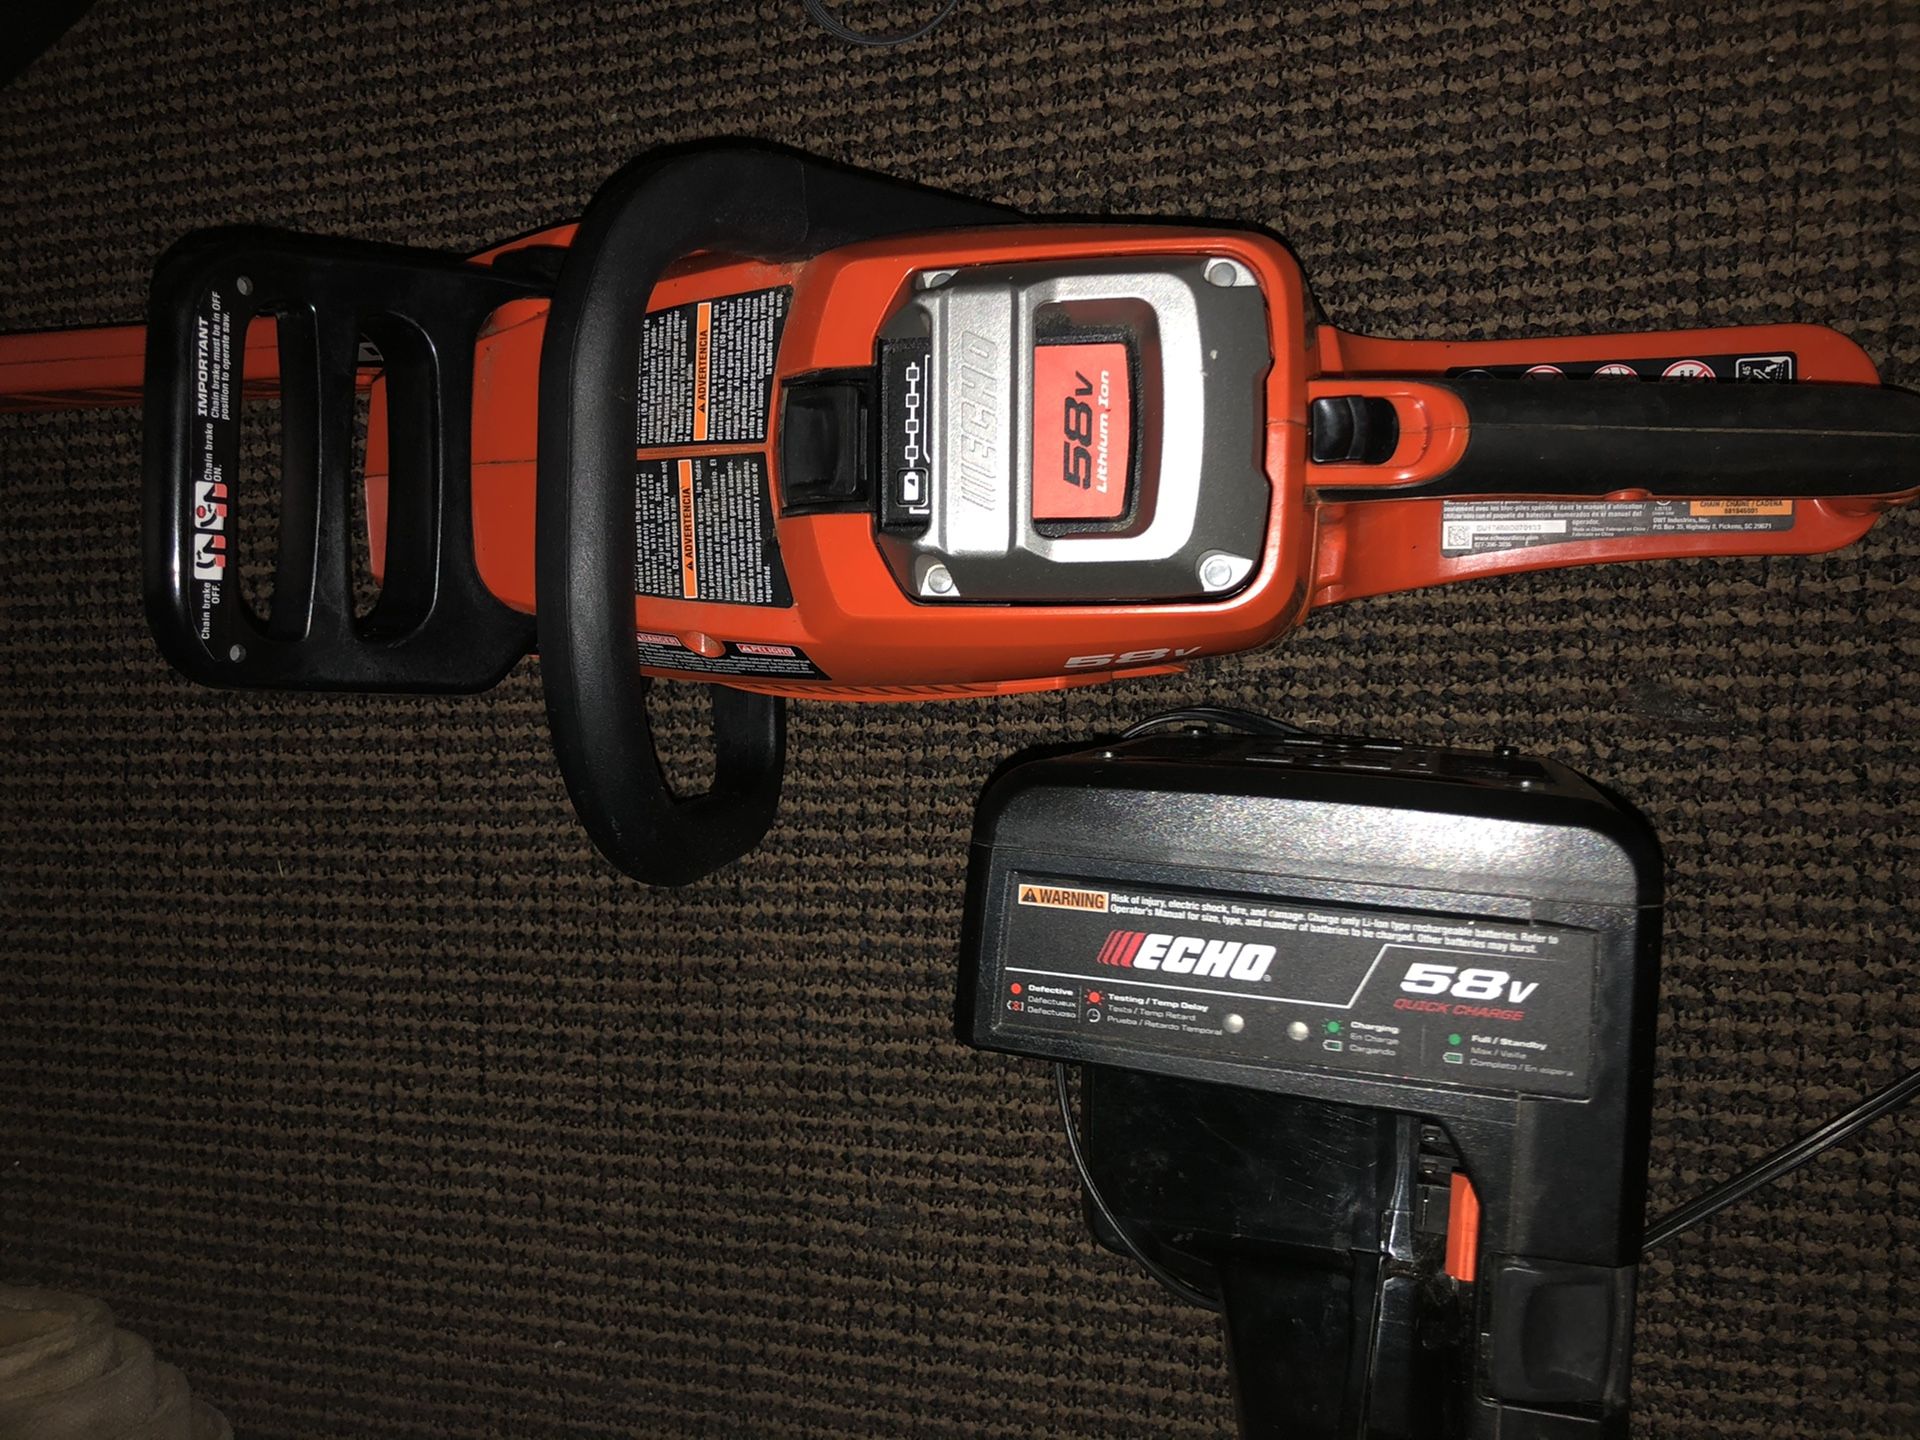 58v echo 16” chainsaw wbattery& charger